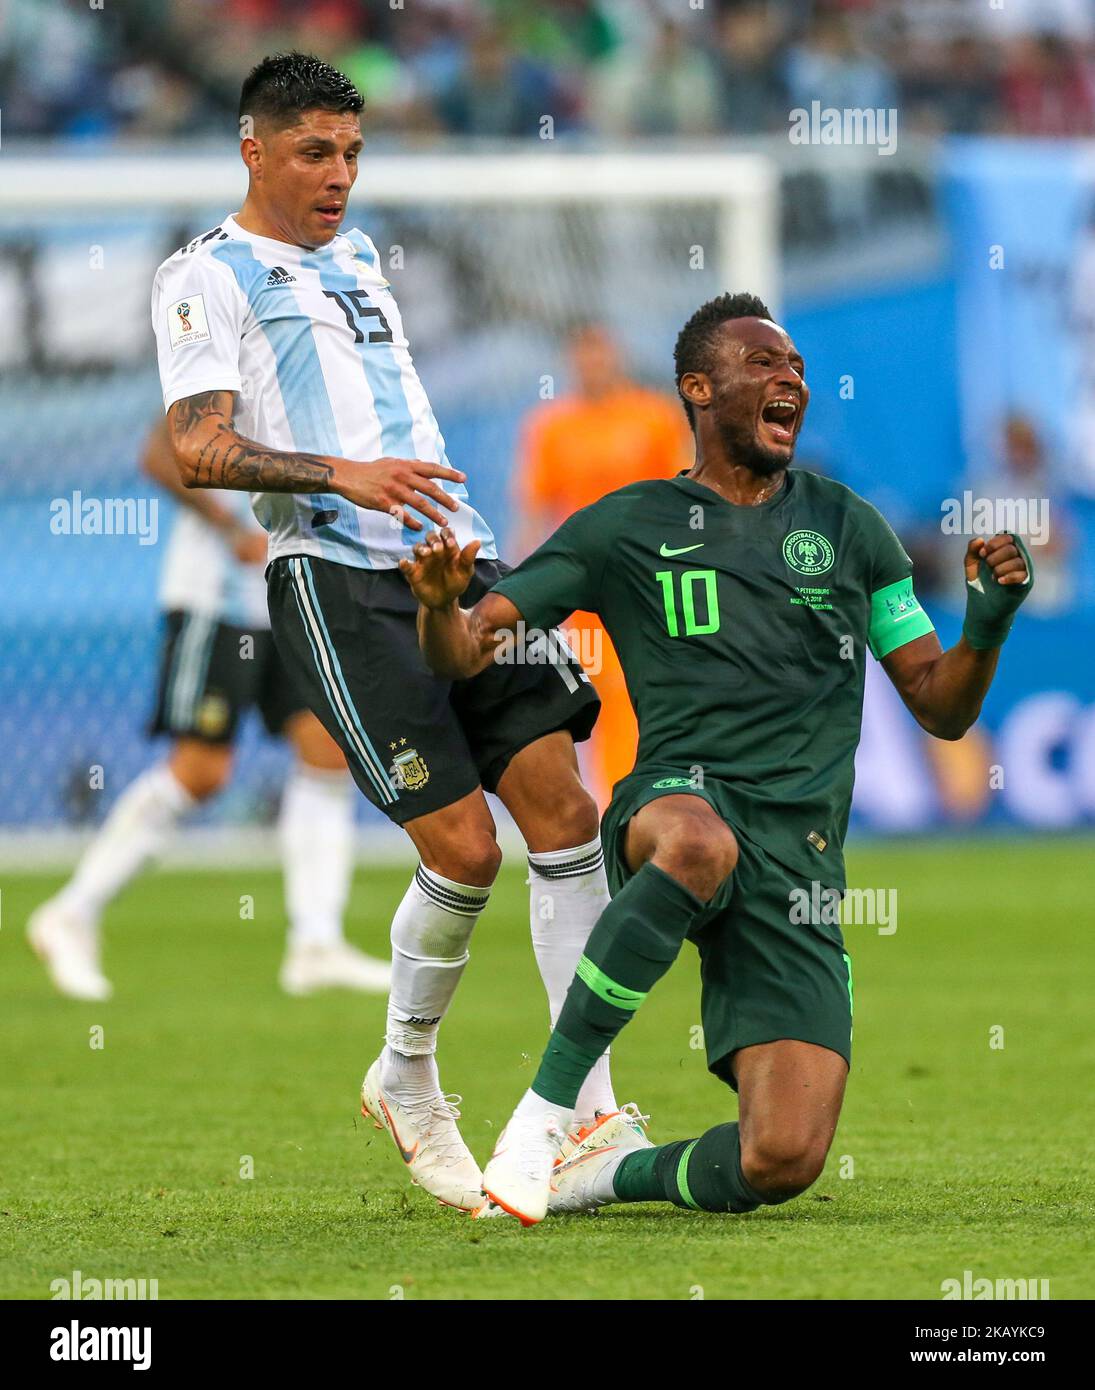 Manuel Lanzini (L) of the Argentina national football team and John Obi Mikel of the Nigeria national football team vie for the ball during the 2018 FIFA World Cup match, first stage - Group D between Nigeria and Argentina at Saint Petersburg Stadium on June 26, 2018 in St. Petersburg, Russia. (Photo by Igor Russak/NurPhoto) Stock Photo